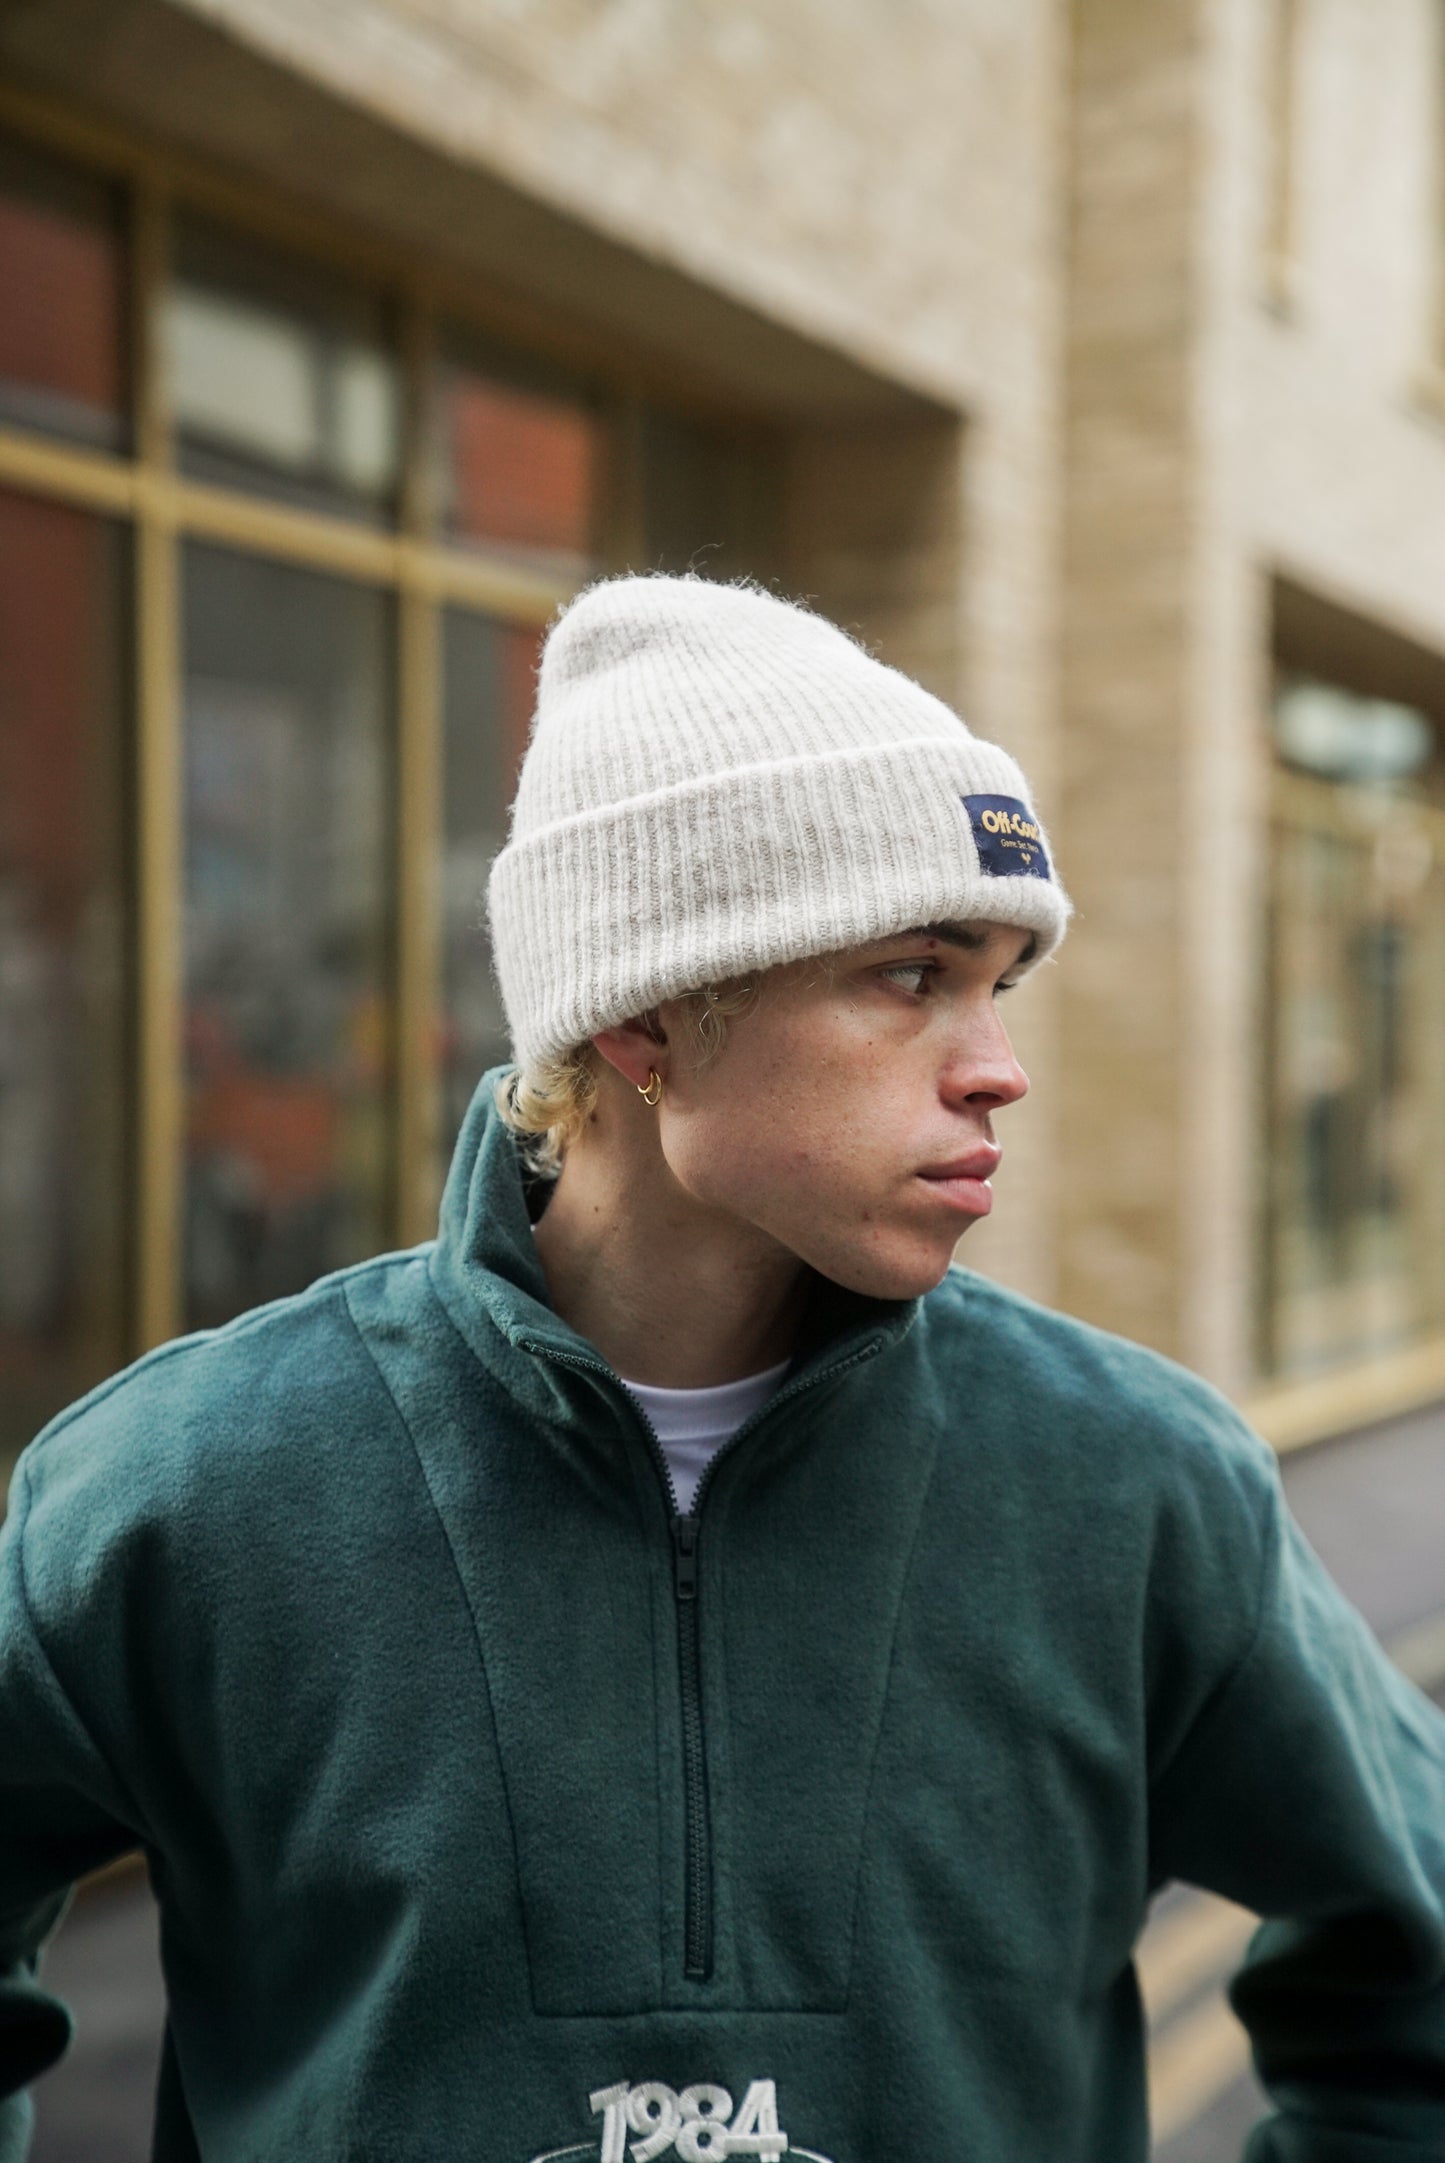 Vice 84 'Off-Court GSM' Cosy Ribbed Beanie - Grey/ Stone/ Black